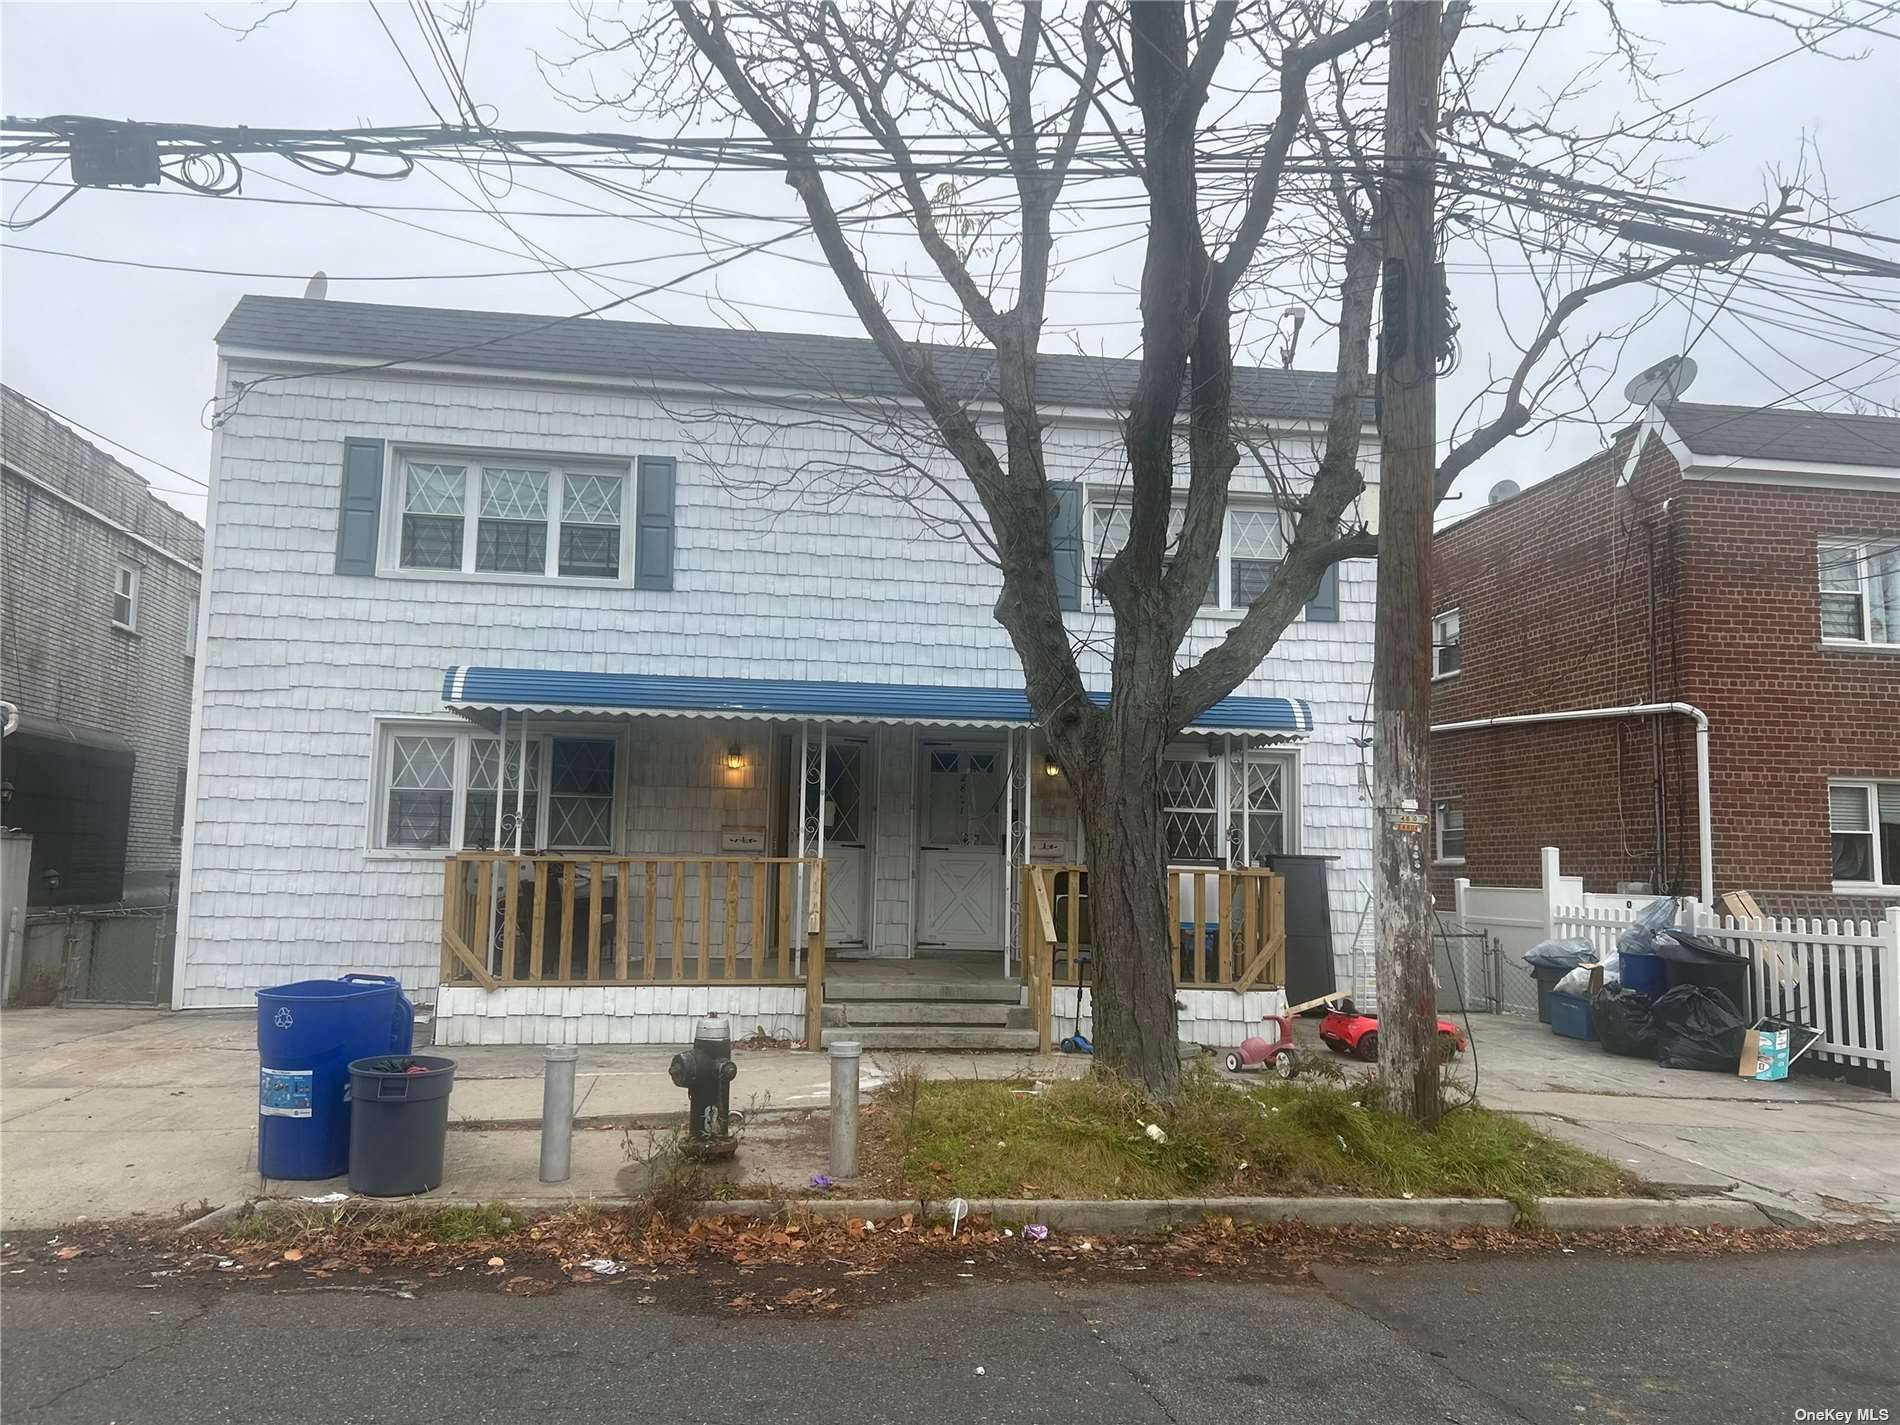 Discover an appealing investment opportunity in Throgs Neck with this well maintained two family house, thoughtfully sold with reliable paying tenants already in place.